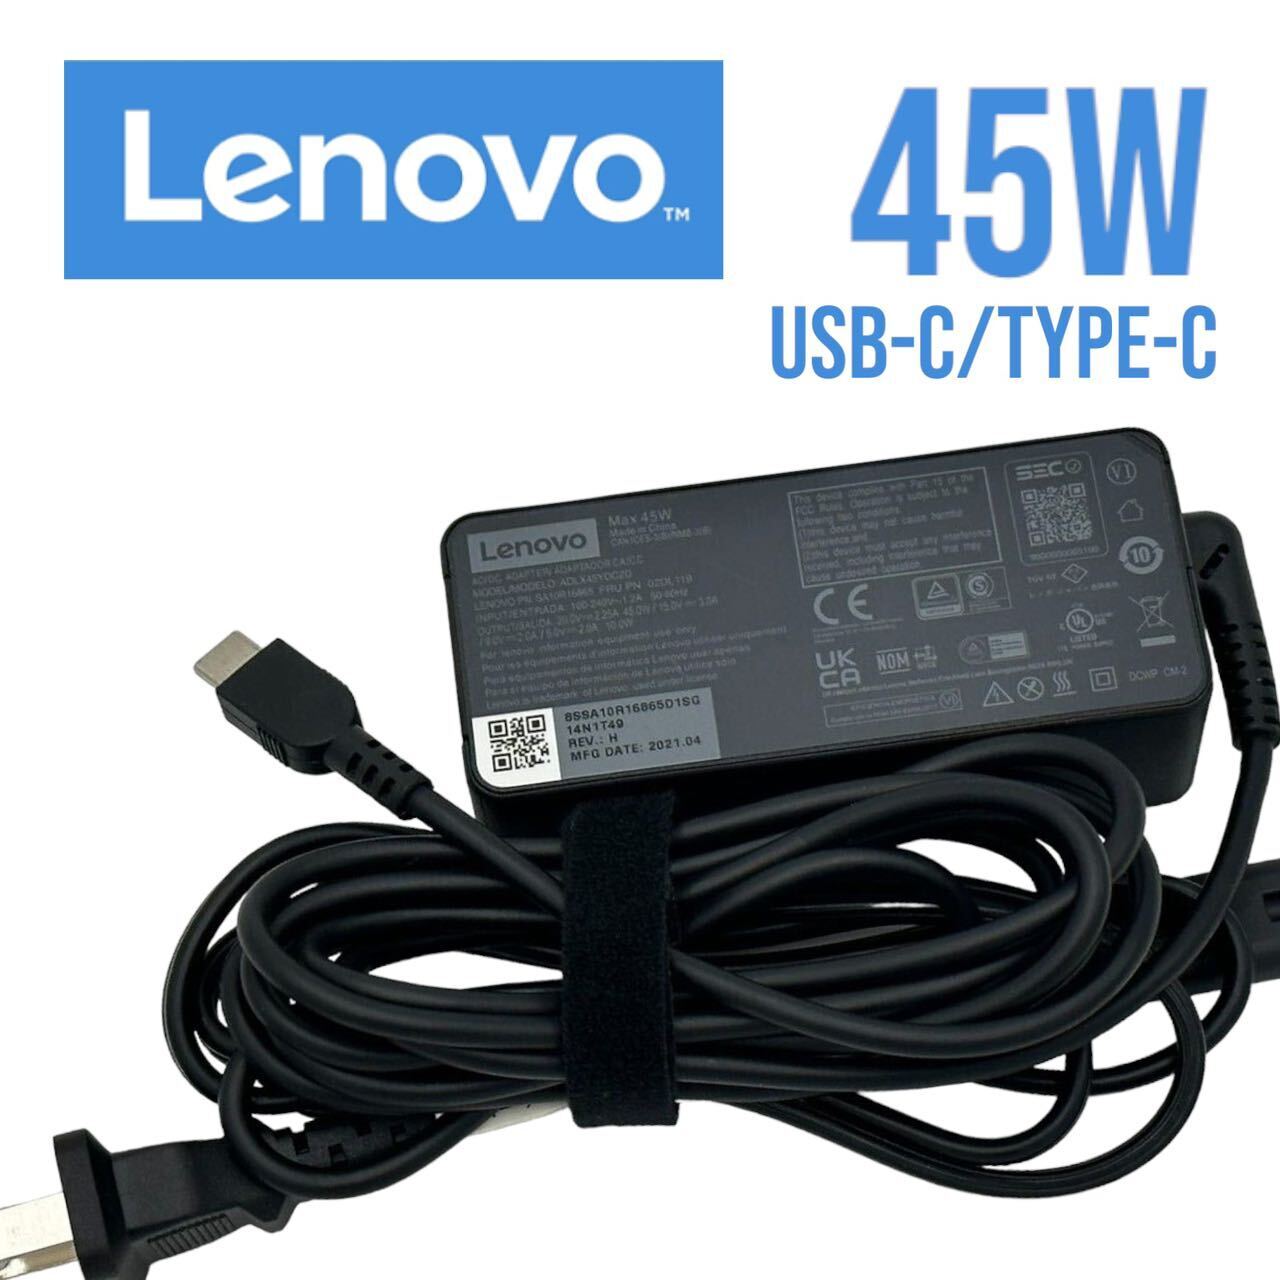 OEM Lenovo 45W USB-C Type-C Power Charger AC Adapter 20V 2.25A Wholesale lot